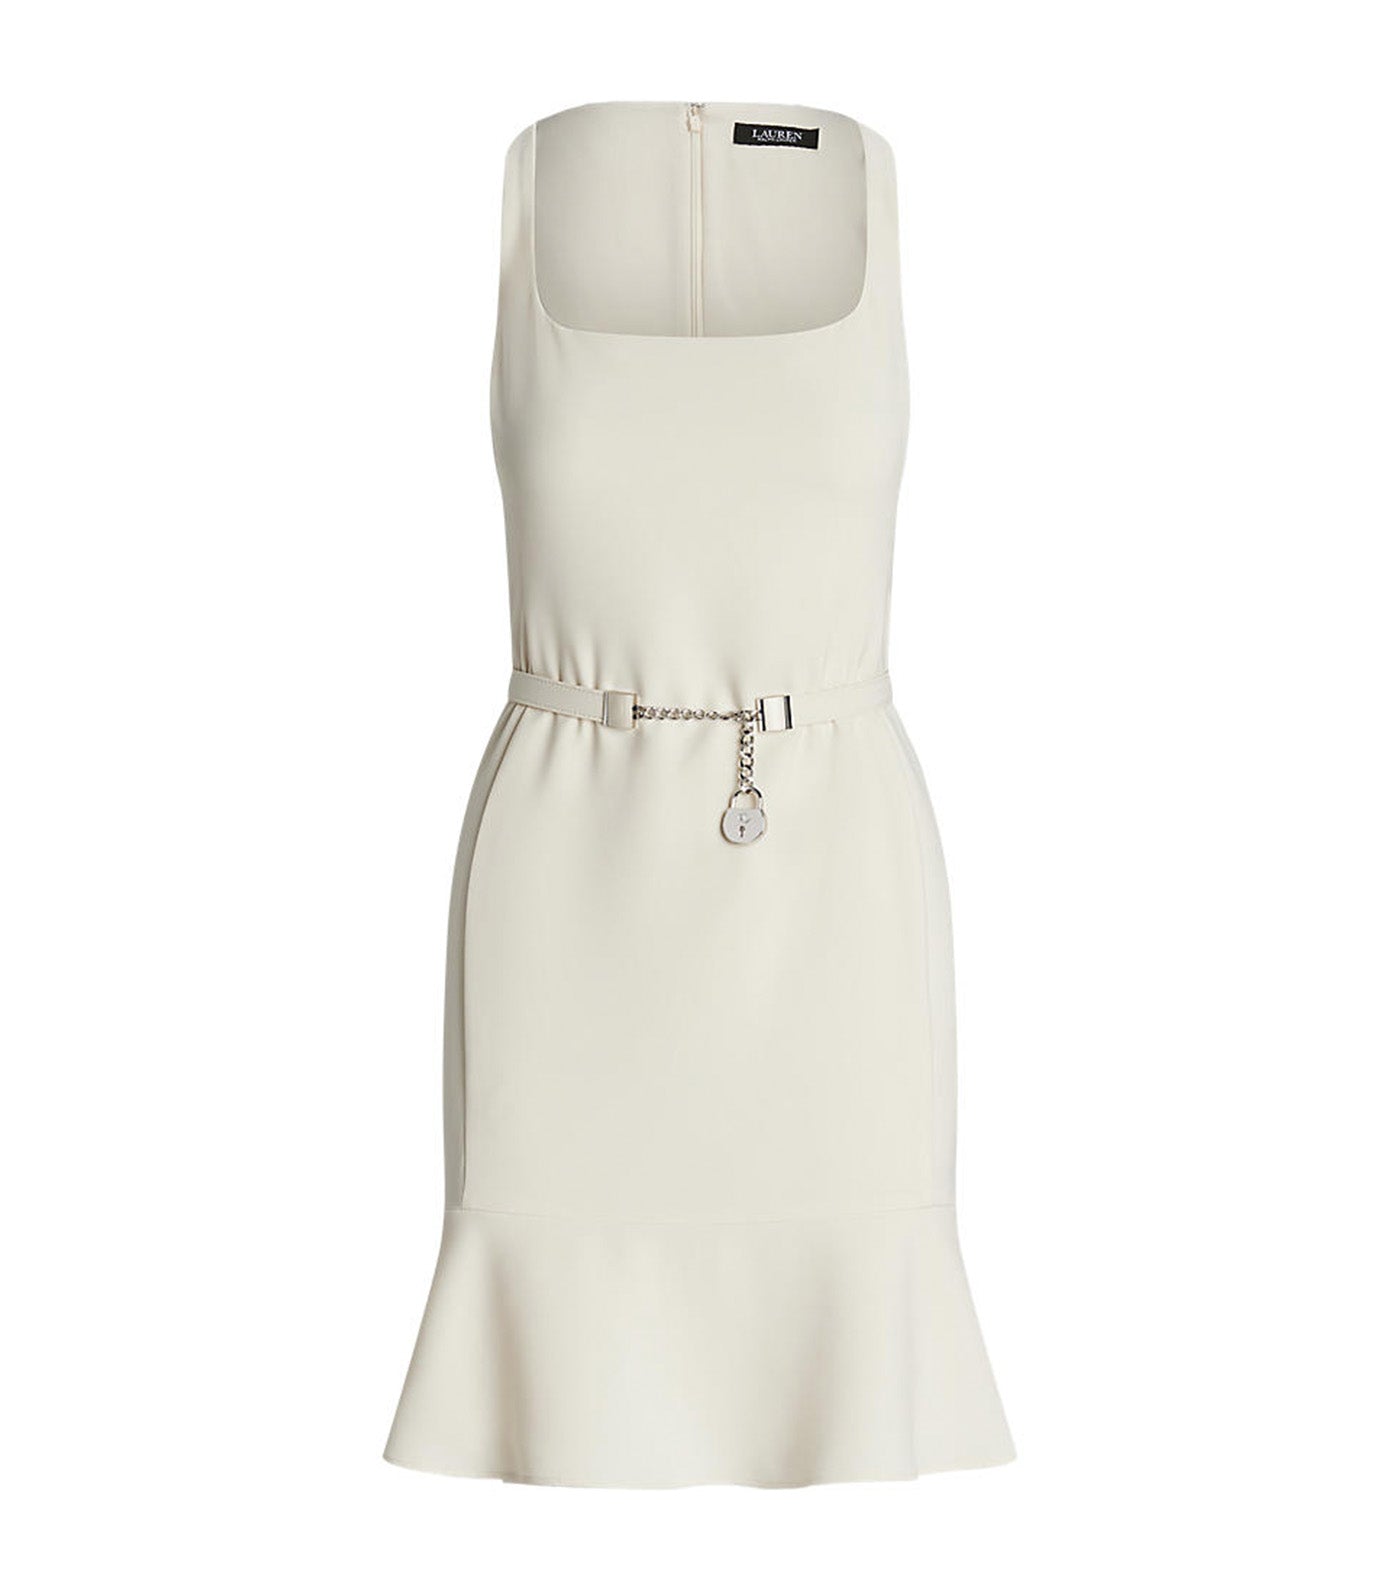 Women's Belted Double-Faced Crepe Dress Mascarpone Cream